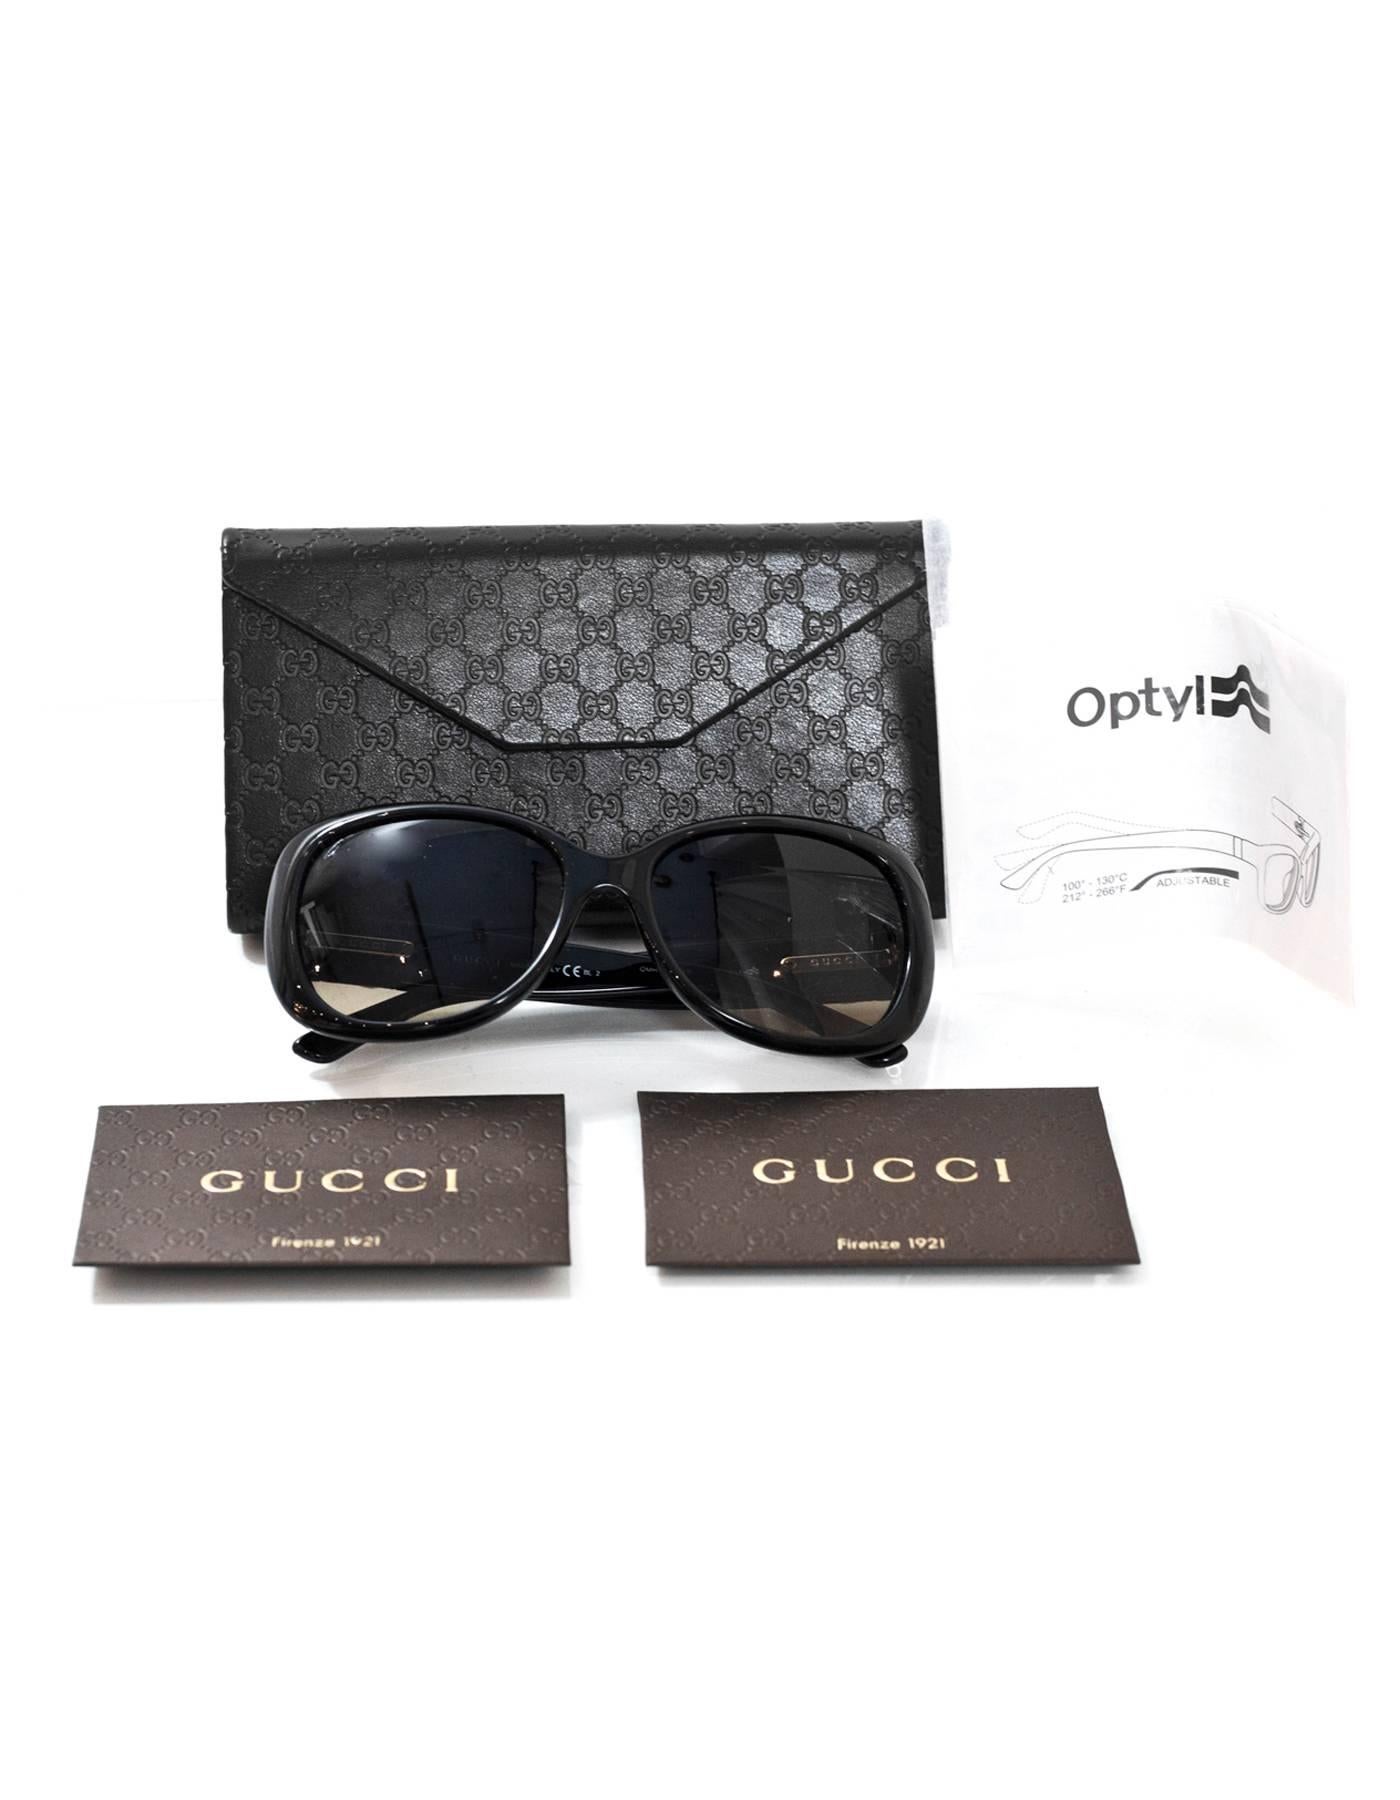 Gucci Black Crystal GG 3644/N/S Sunglasses with Case 1